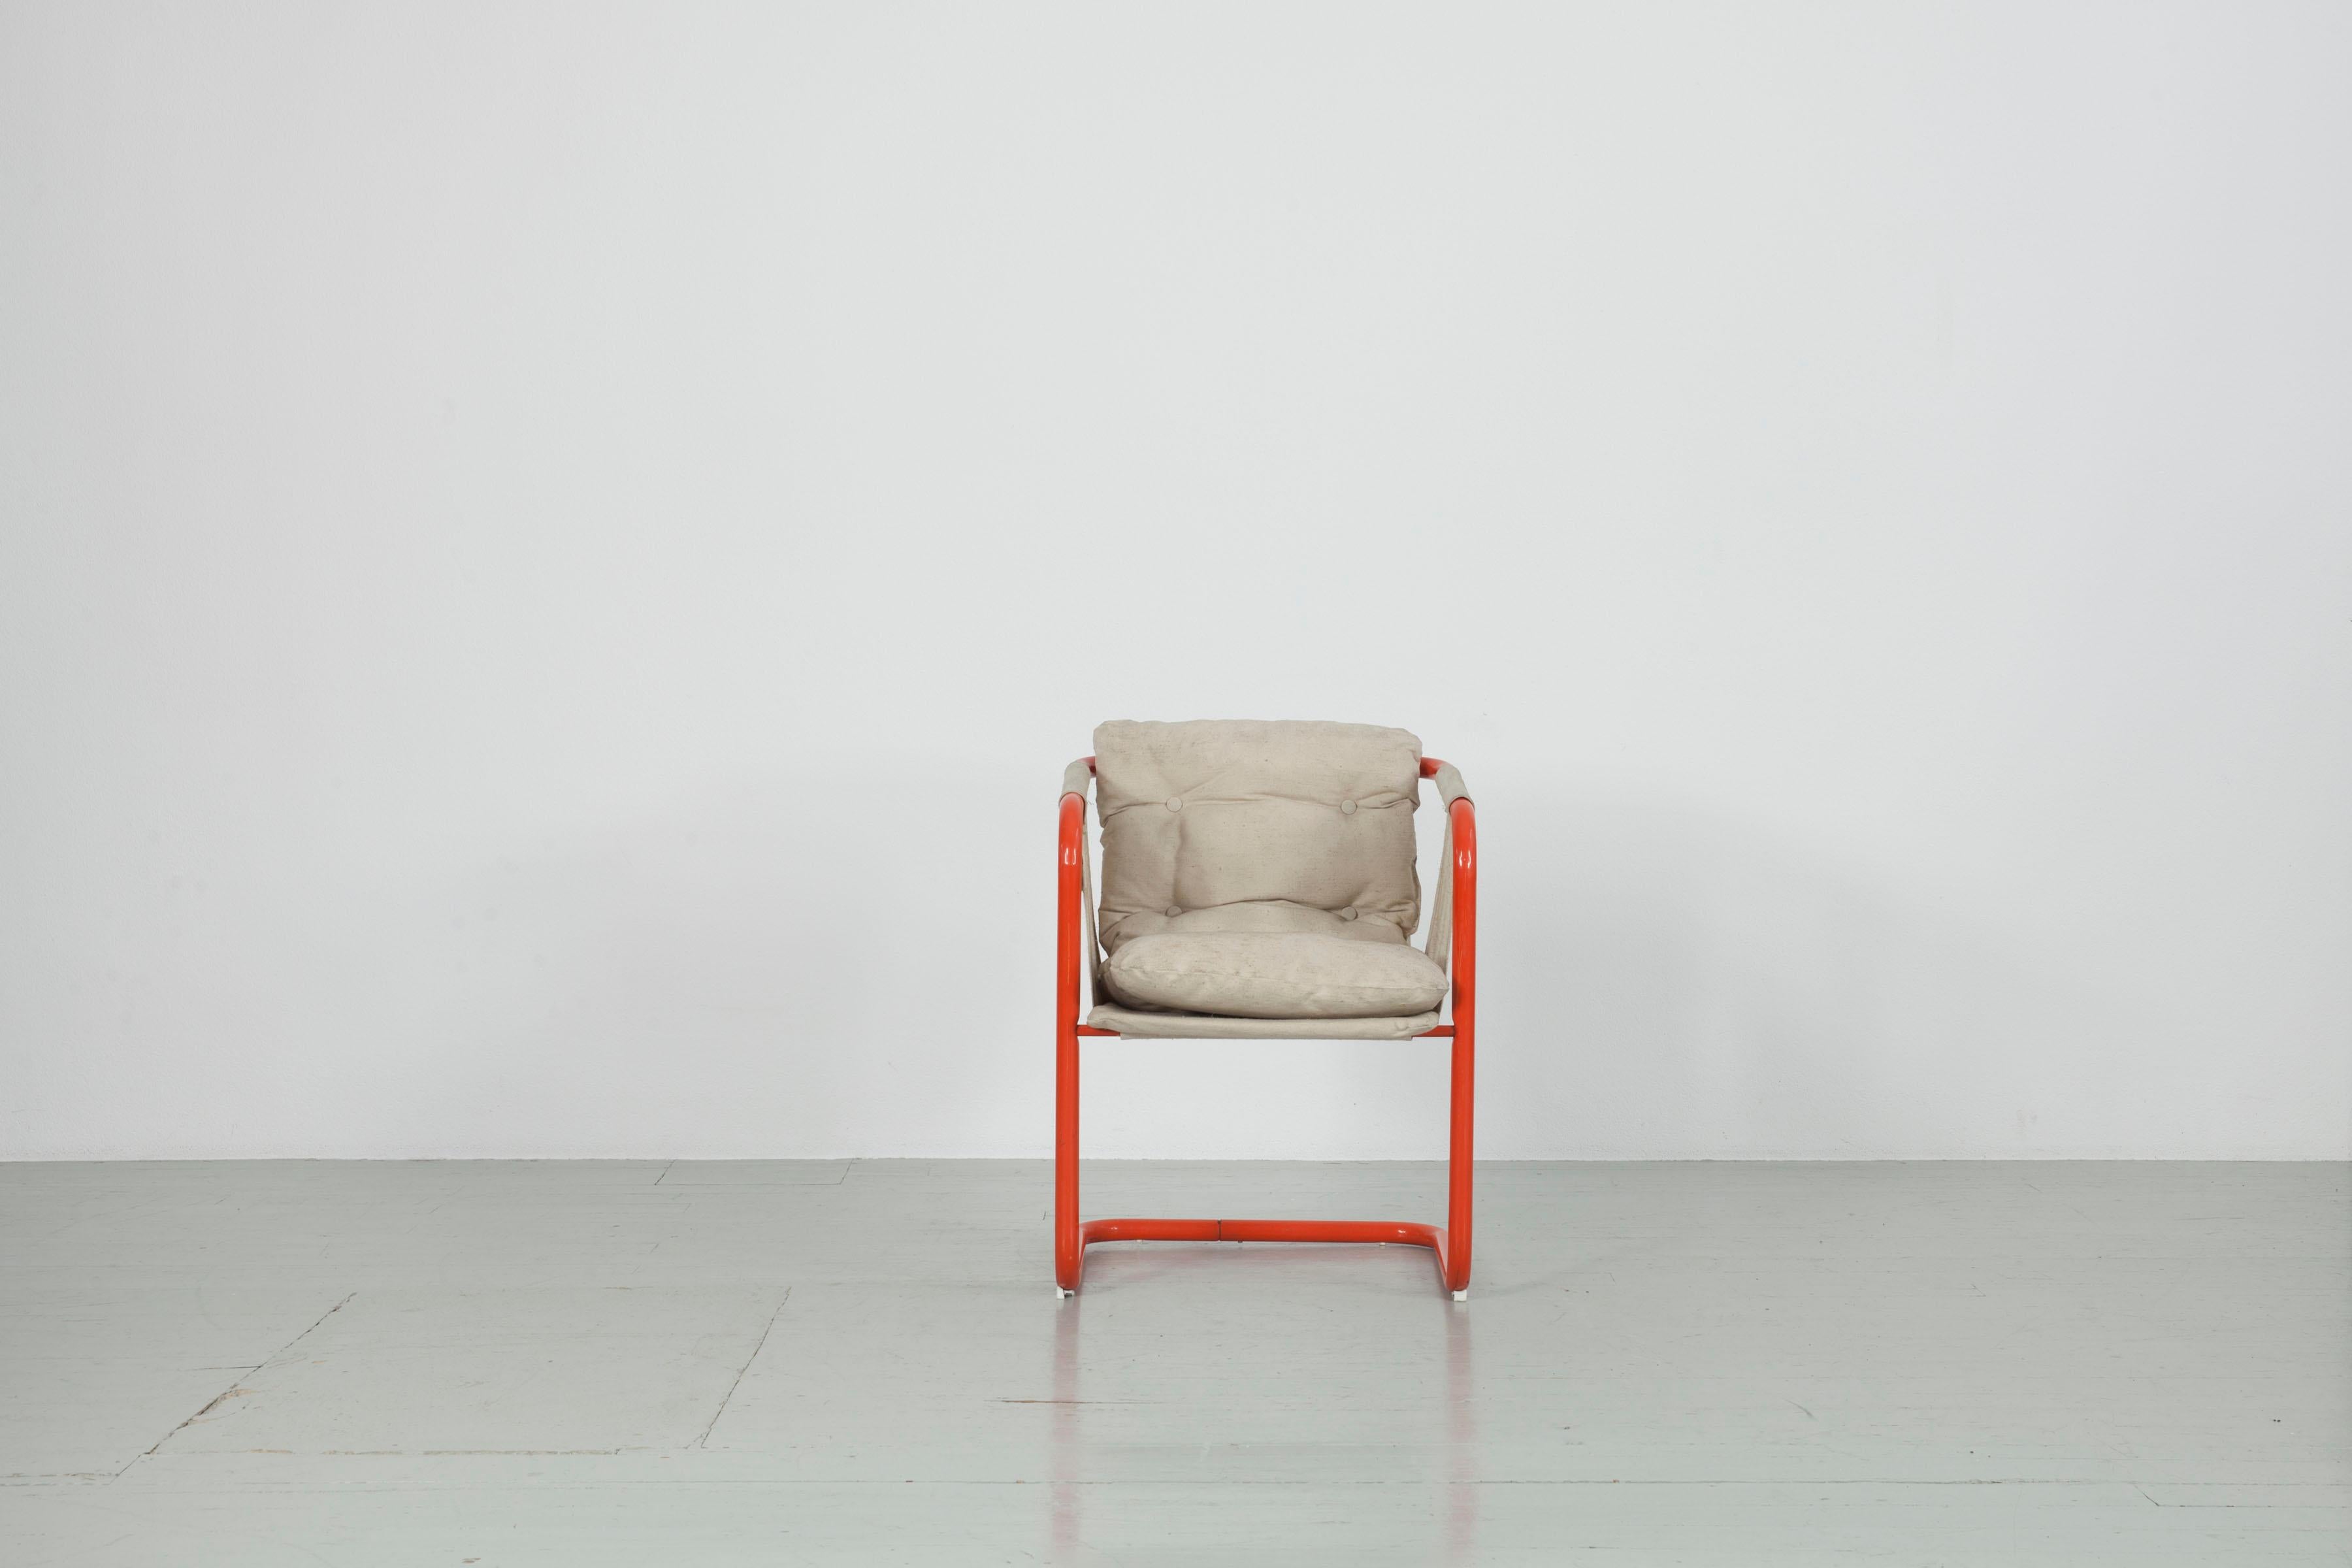 This set of four chairs was made in the style of Gae Aulenti. The light linen upholstery contrasts with the orange tubular steel frame. The fabric shows heavy signs of wear in some places and should be renewed. Otherwise, the chairs are in stable